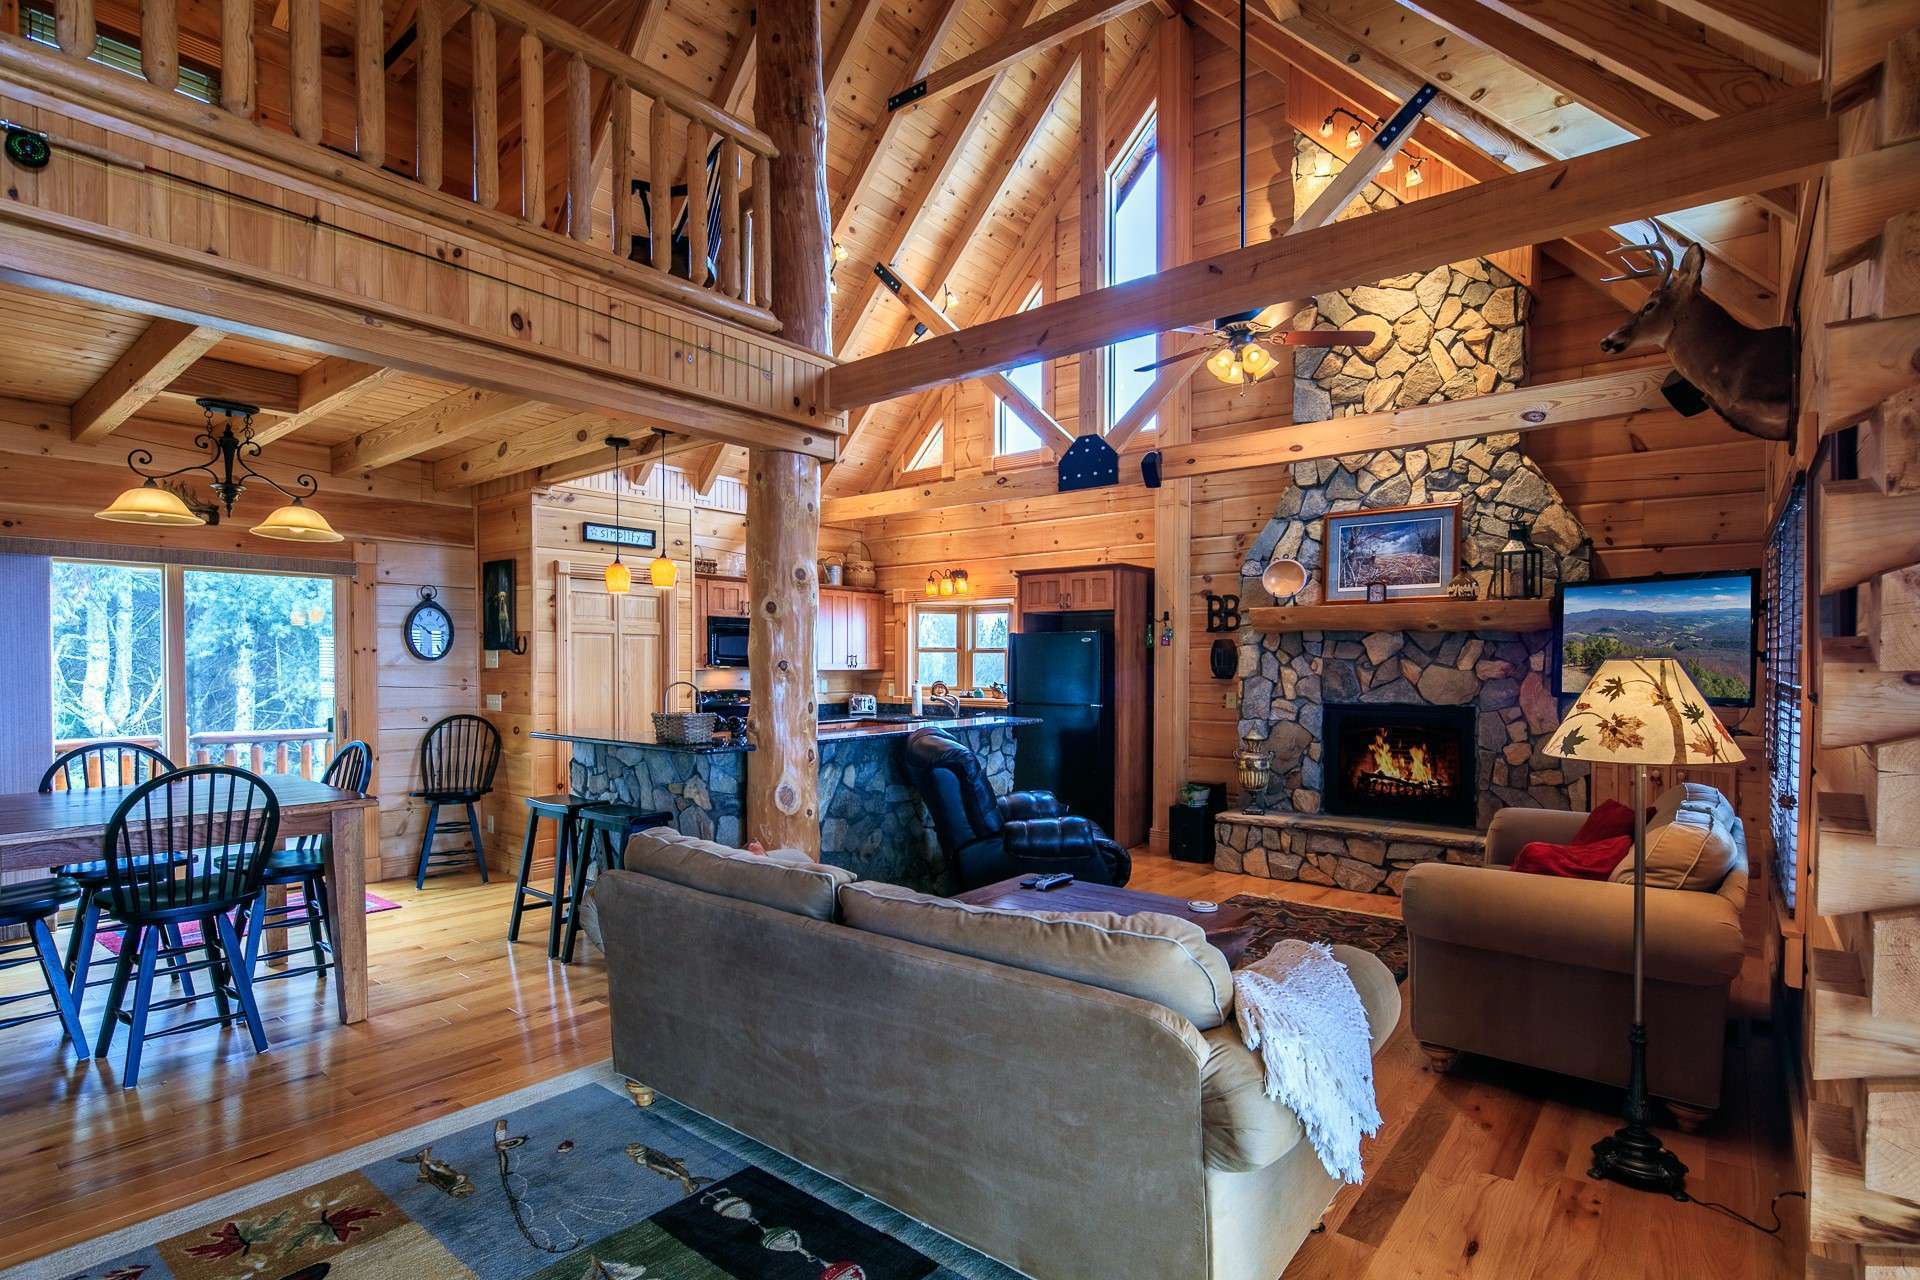 The main level offers an open great room with a soaring vaulted ceiling, stone fireplace with gas logs installed,(could be converted back to wood-burning if desired.) wood floors, stunning architectural accents and quality custom appointments.